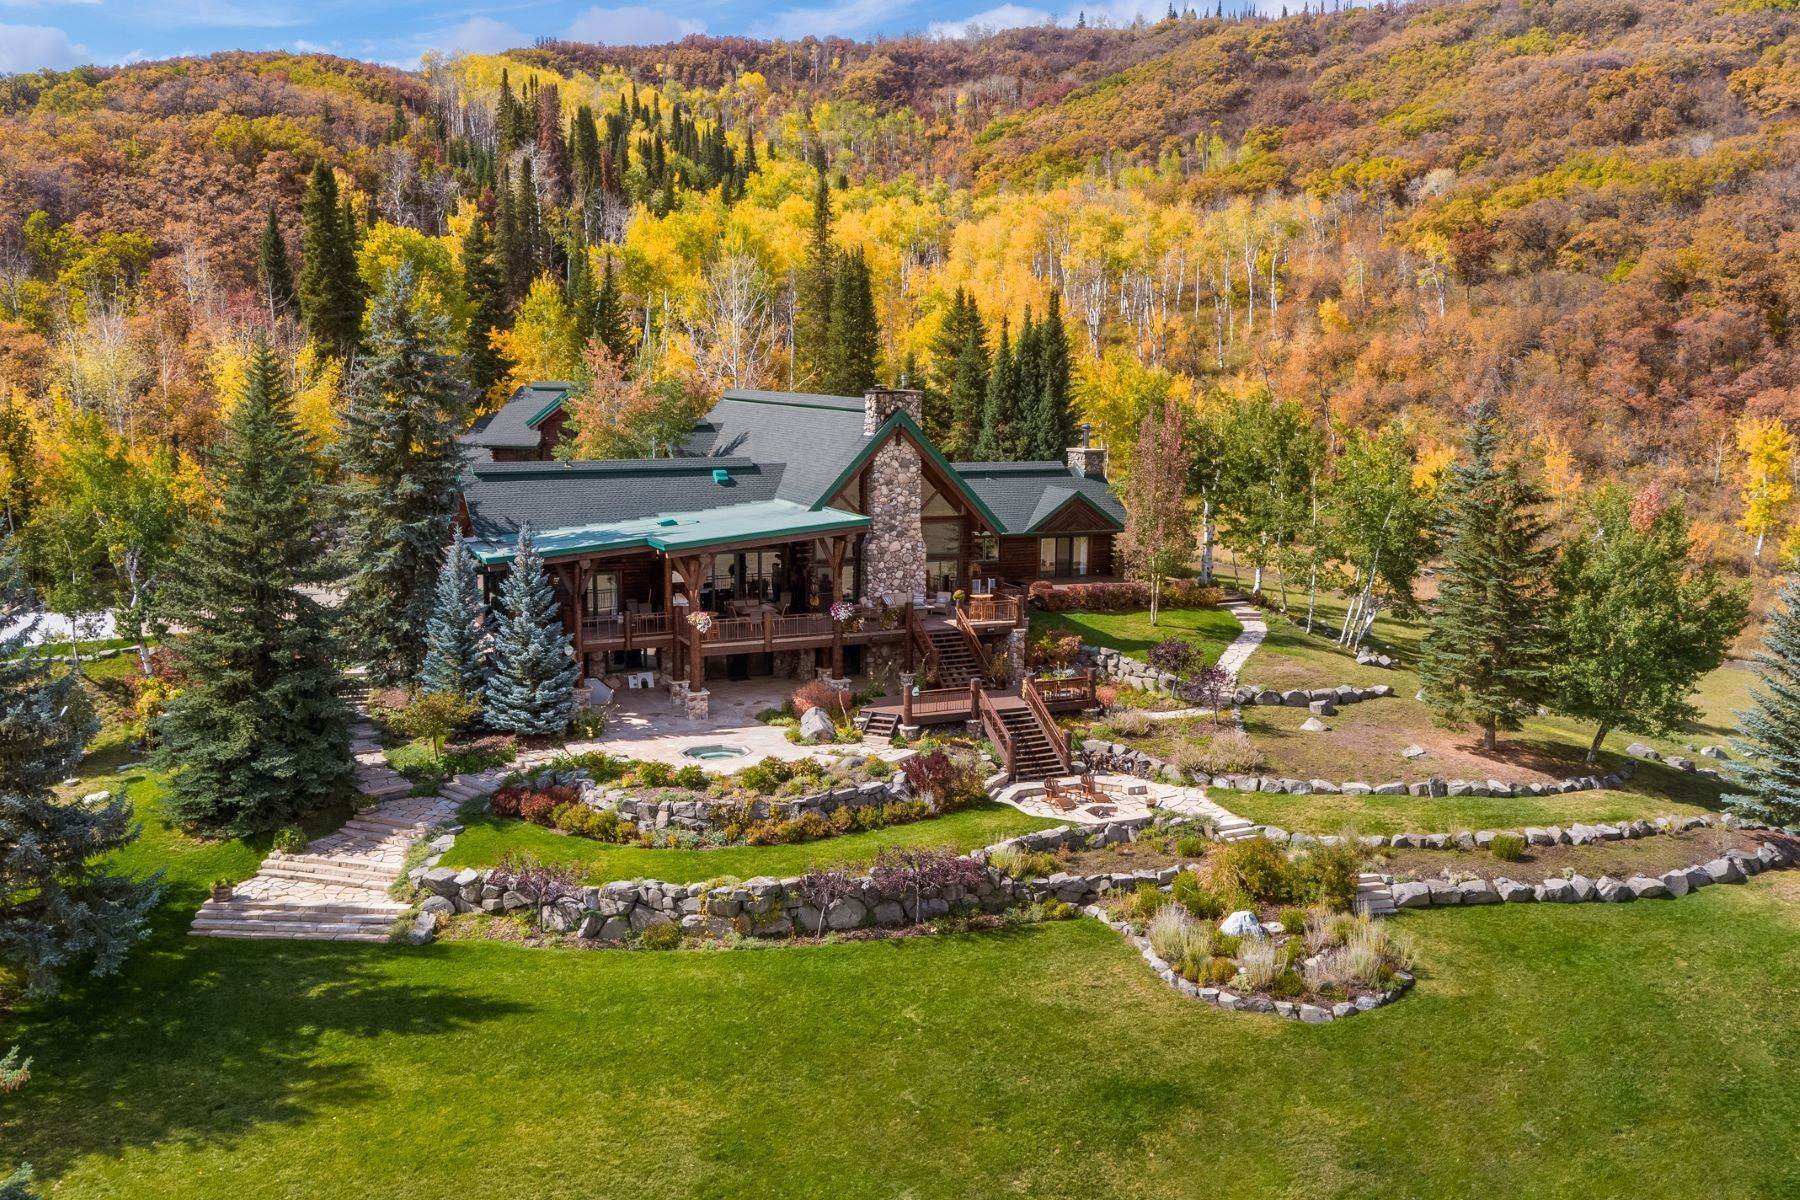 Property for Sale at Emerald Meadows Ranch 29855 Emerald Meadows Dr. Steamboat Springs, Colorado 80487 United States